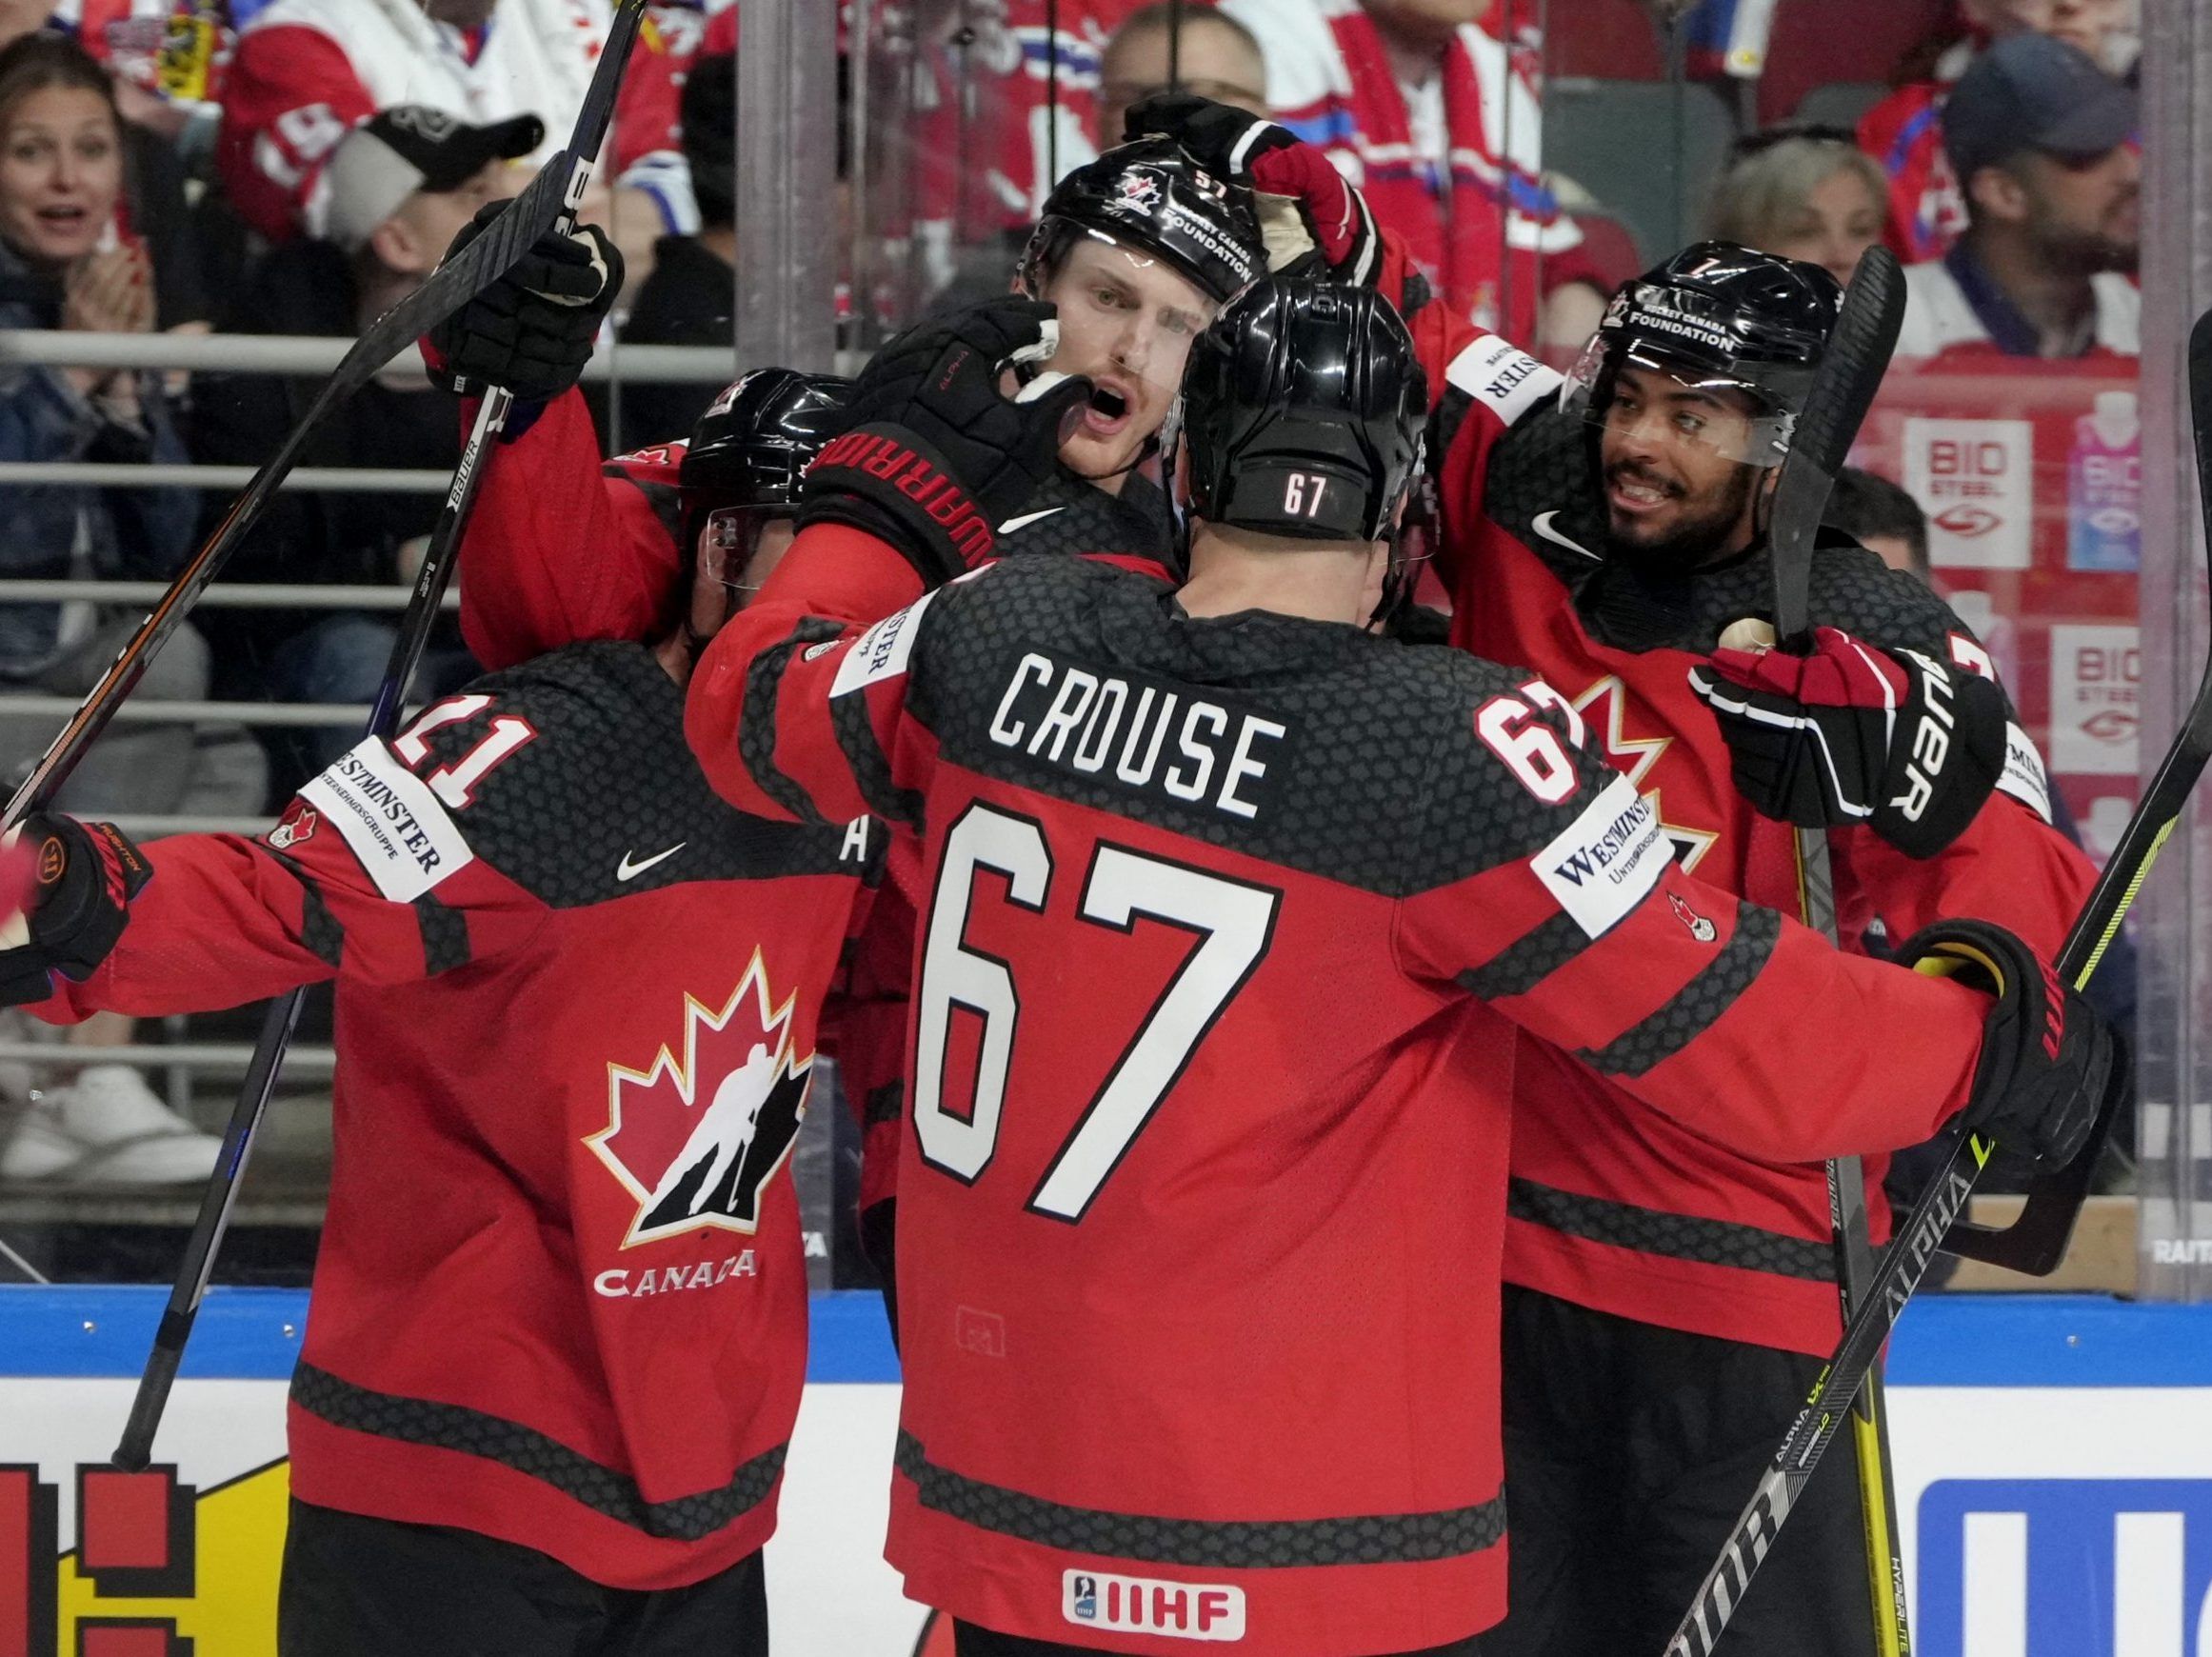 U.S. shuts out Sweden, wins Group B at world junior hockey